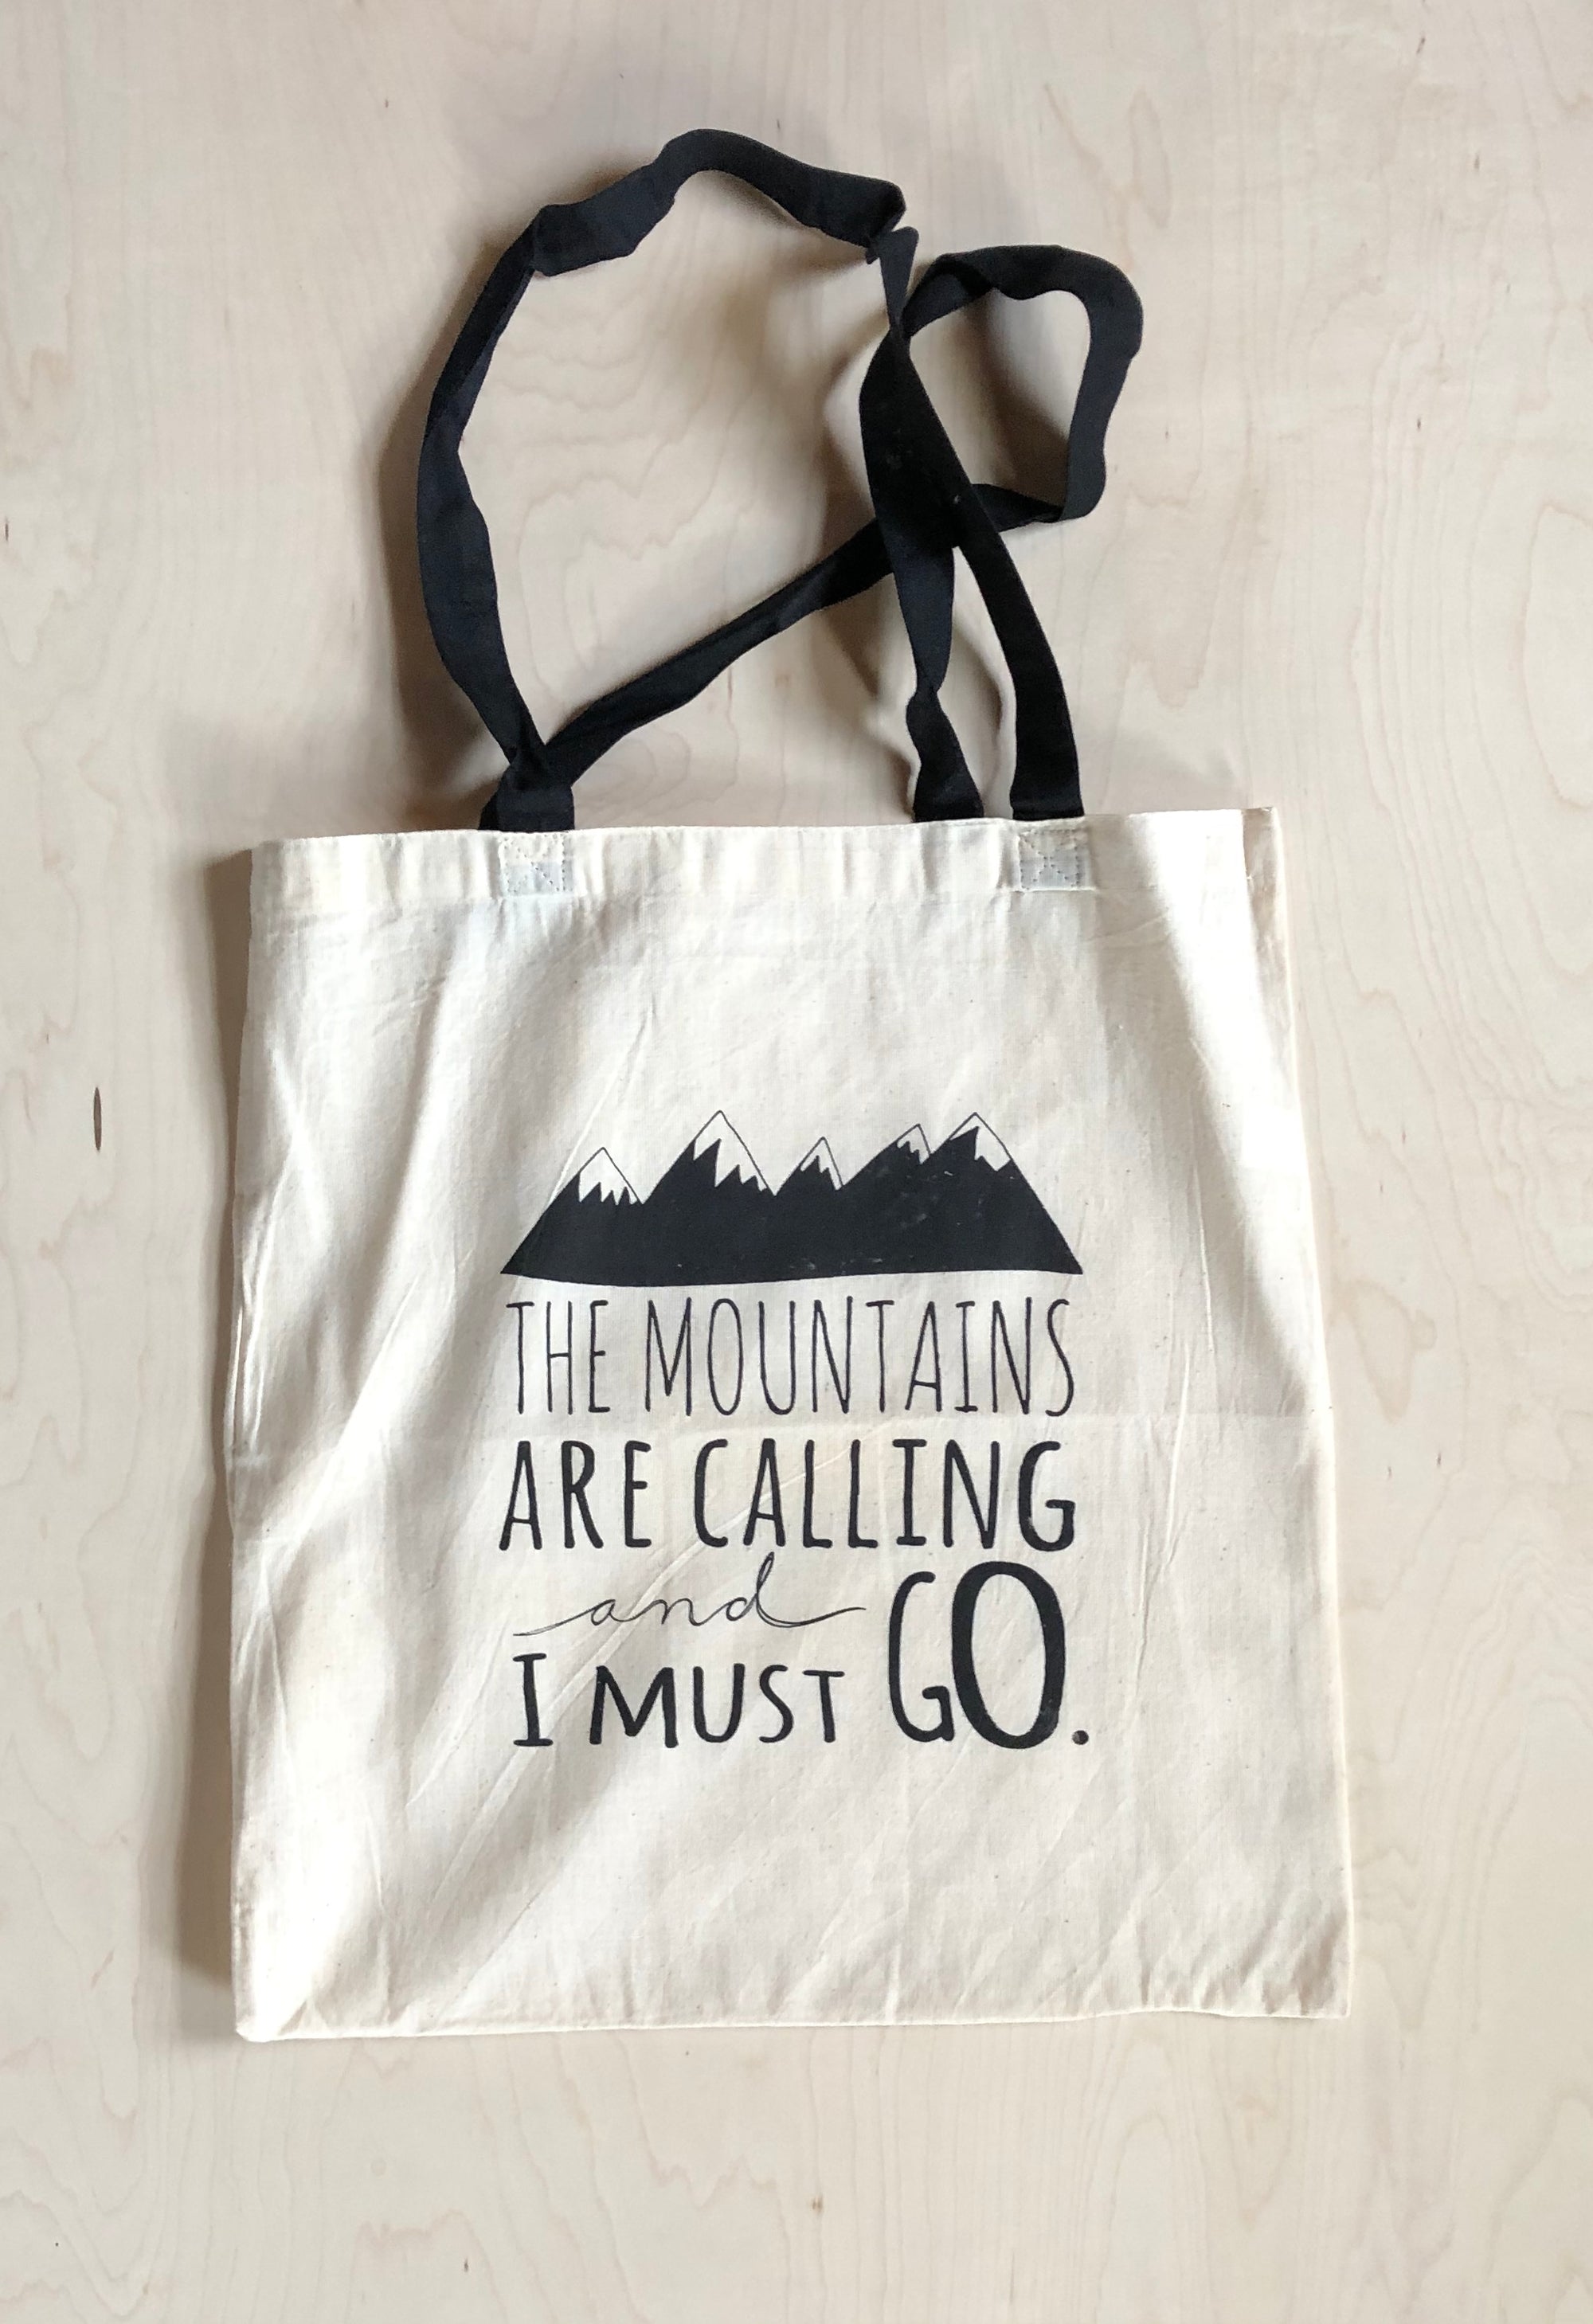 “The mountains are calling I must go” Tote Bag